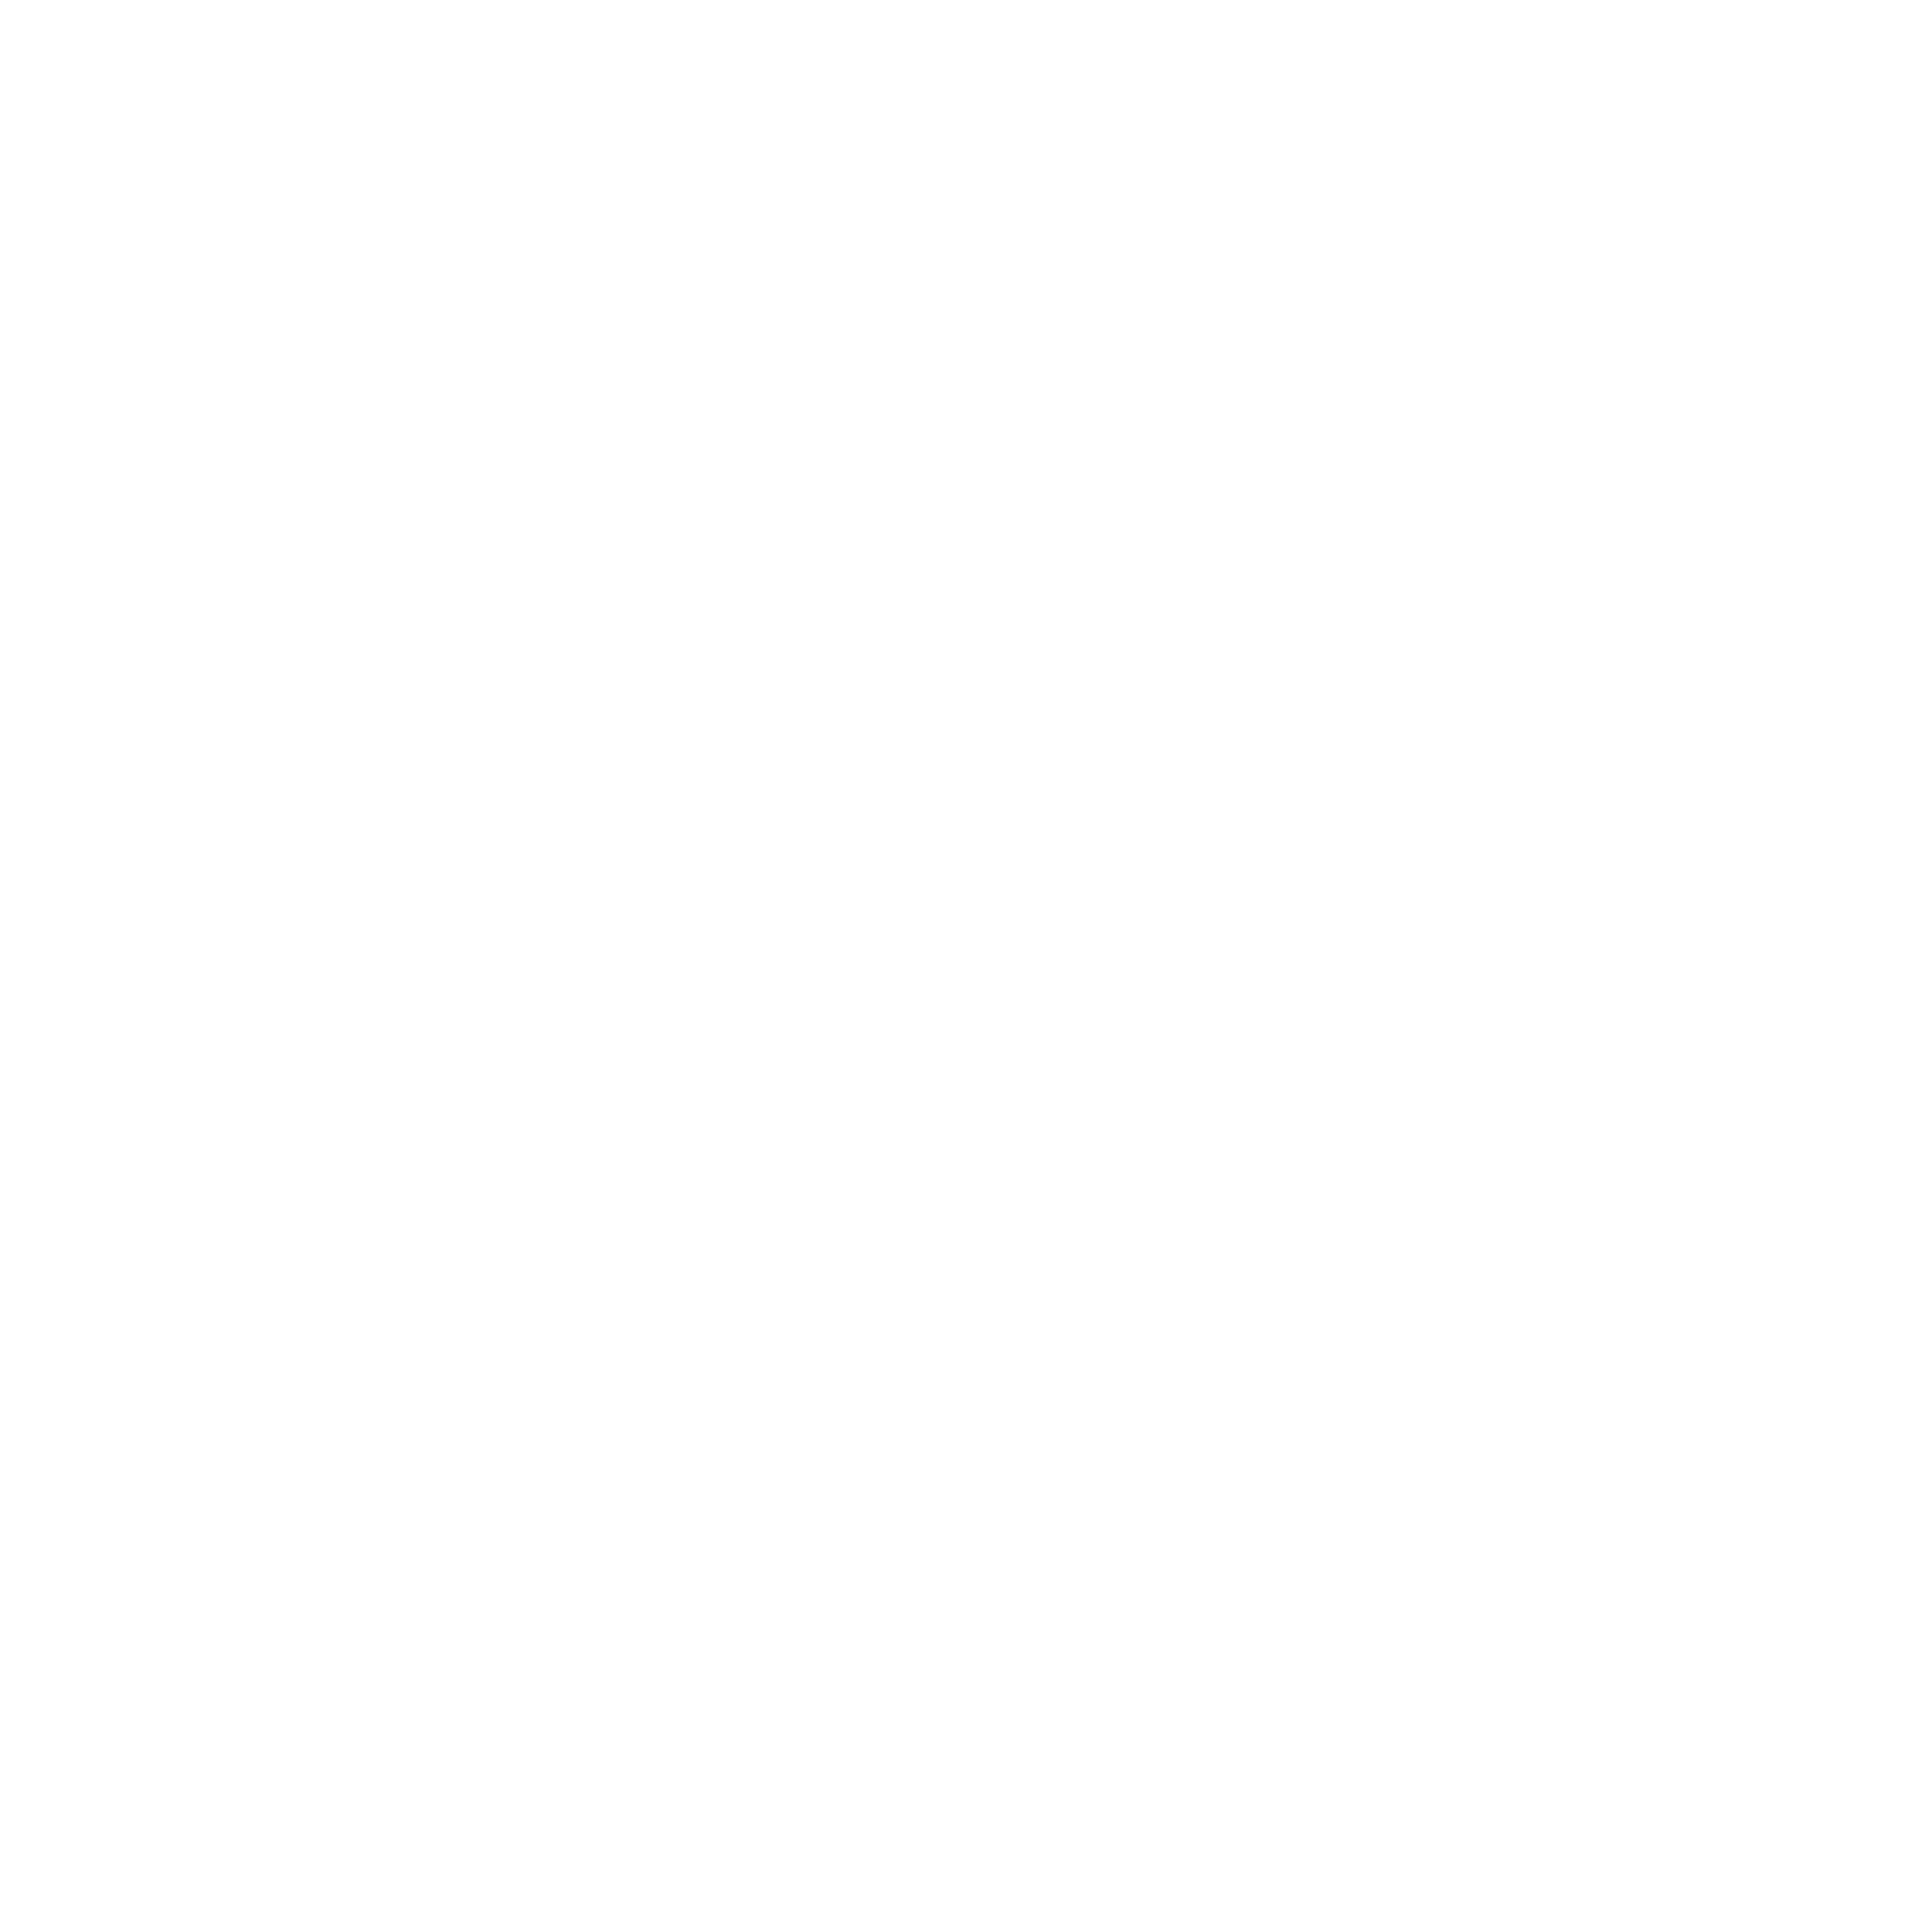 https://a.storyblok.com/f/180781/1772x1772/1f74c2f8bf/responsible-icons-loved-again-copy.png